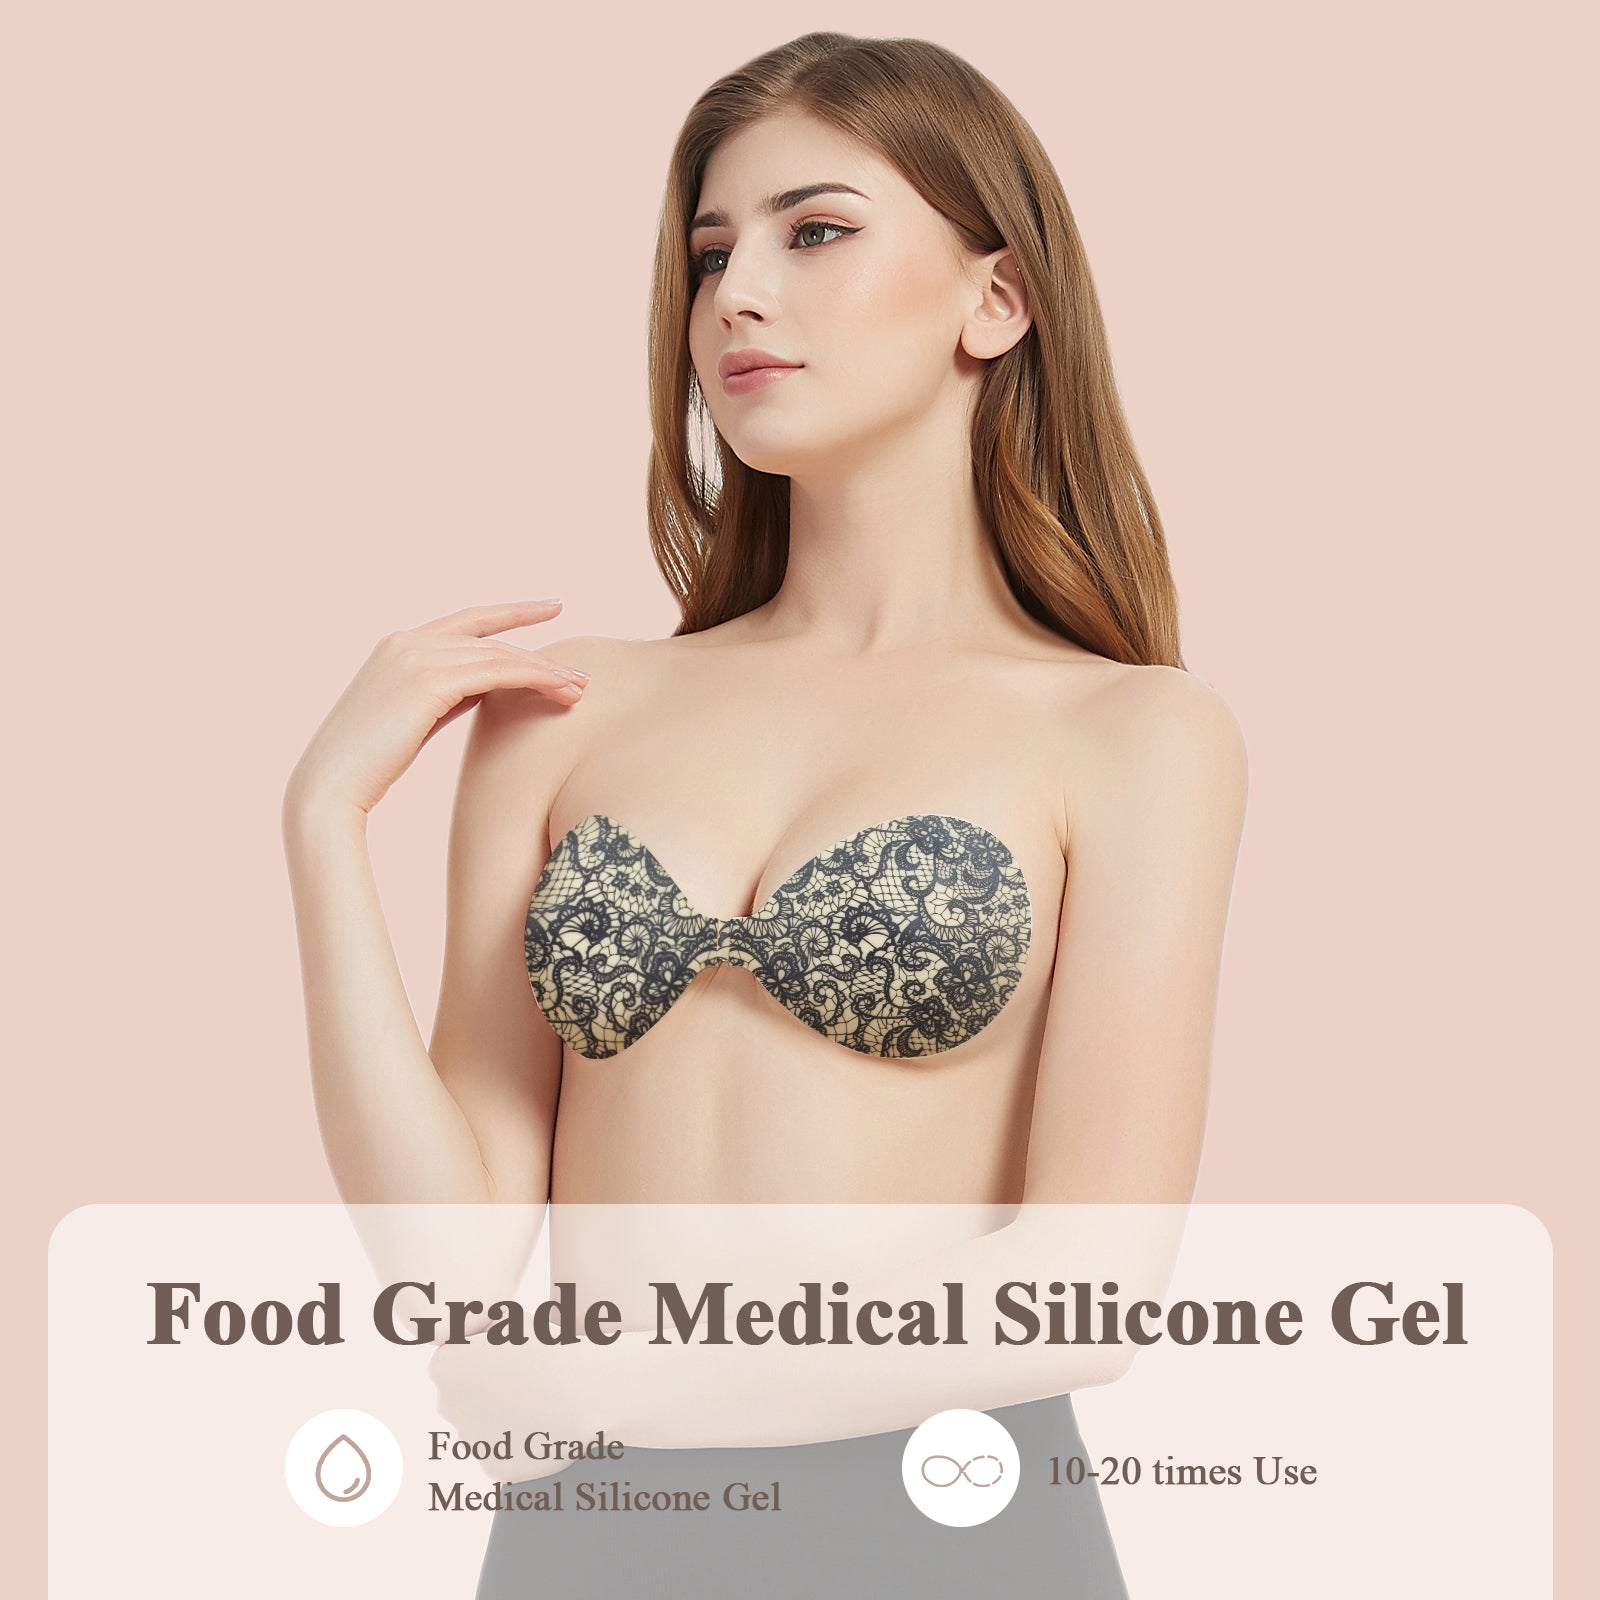 Silicone backless bra with lace